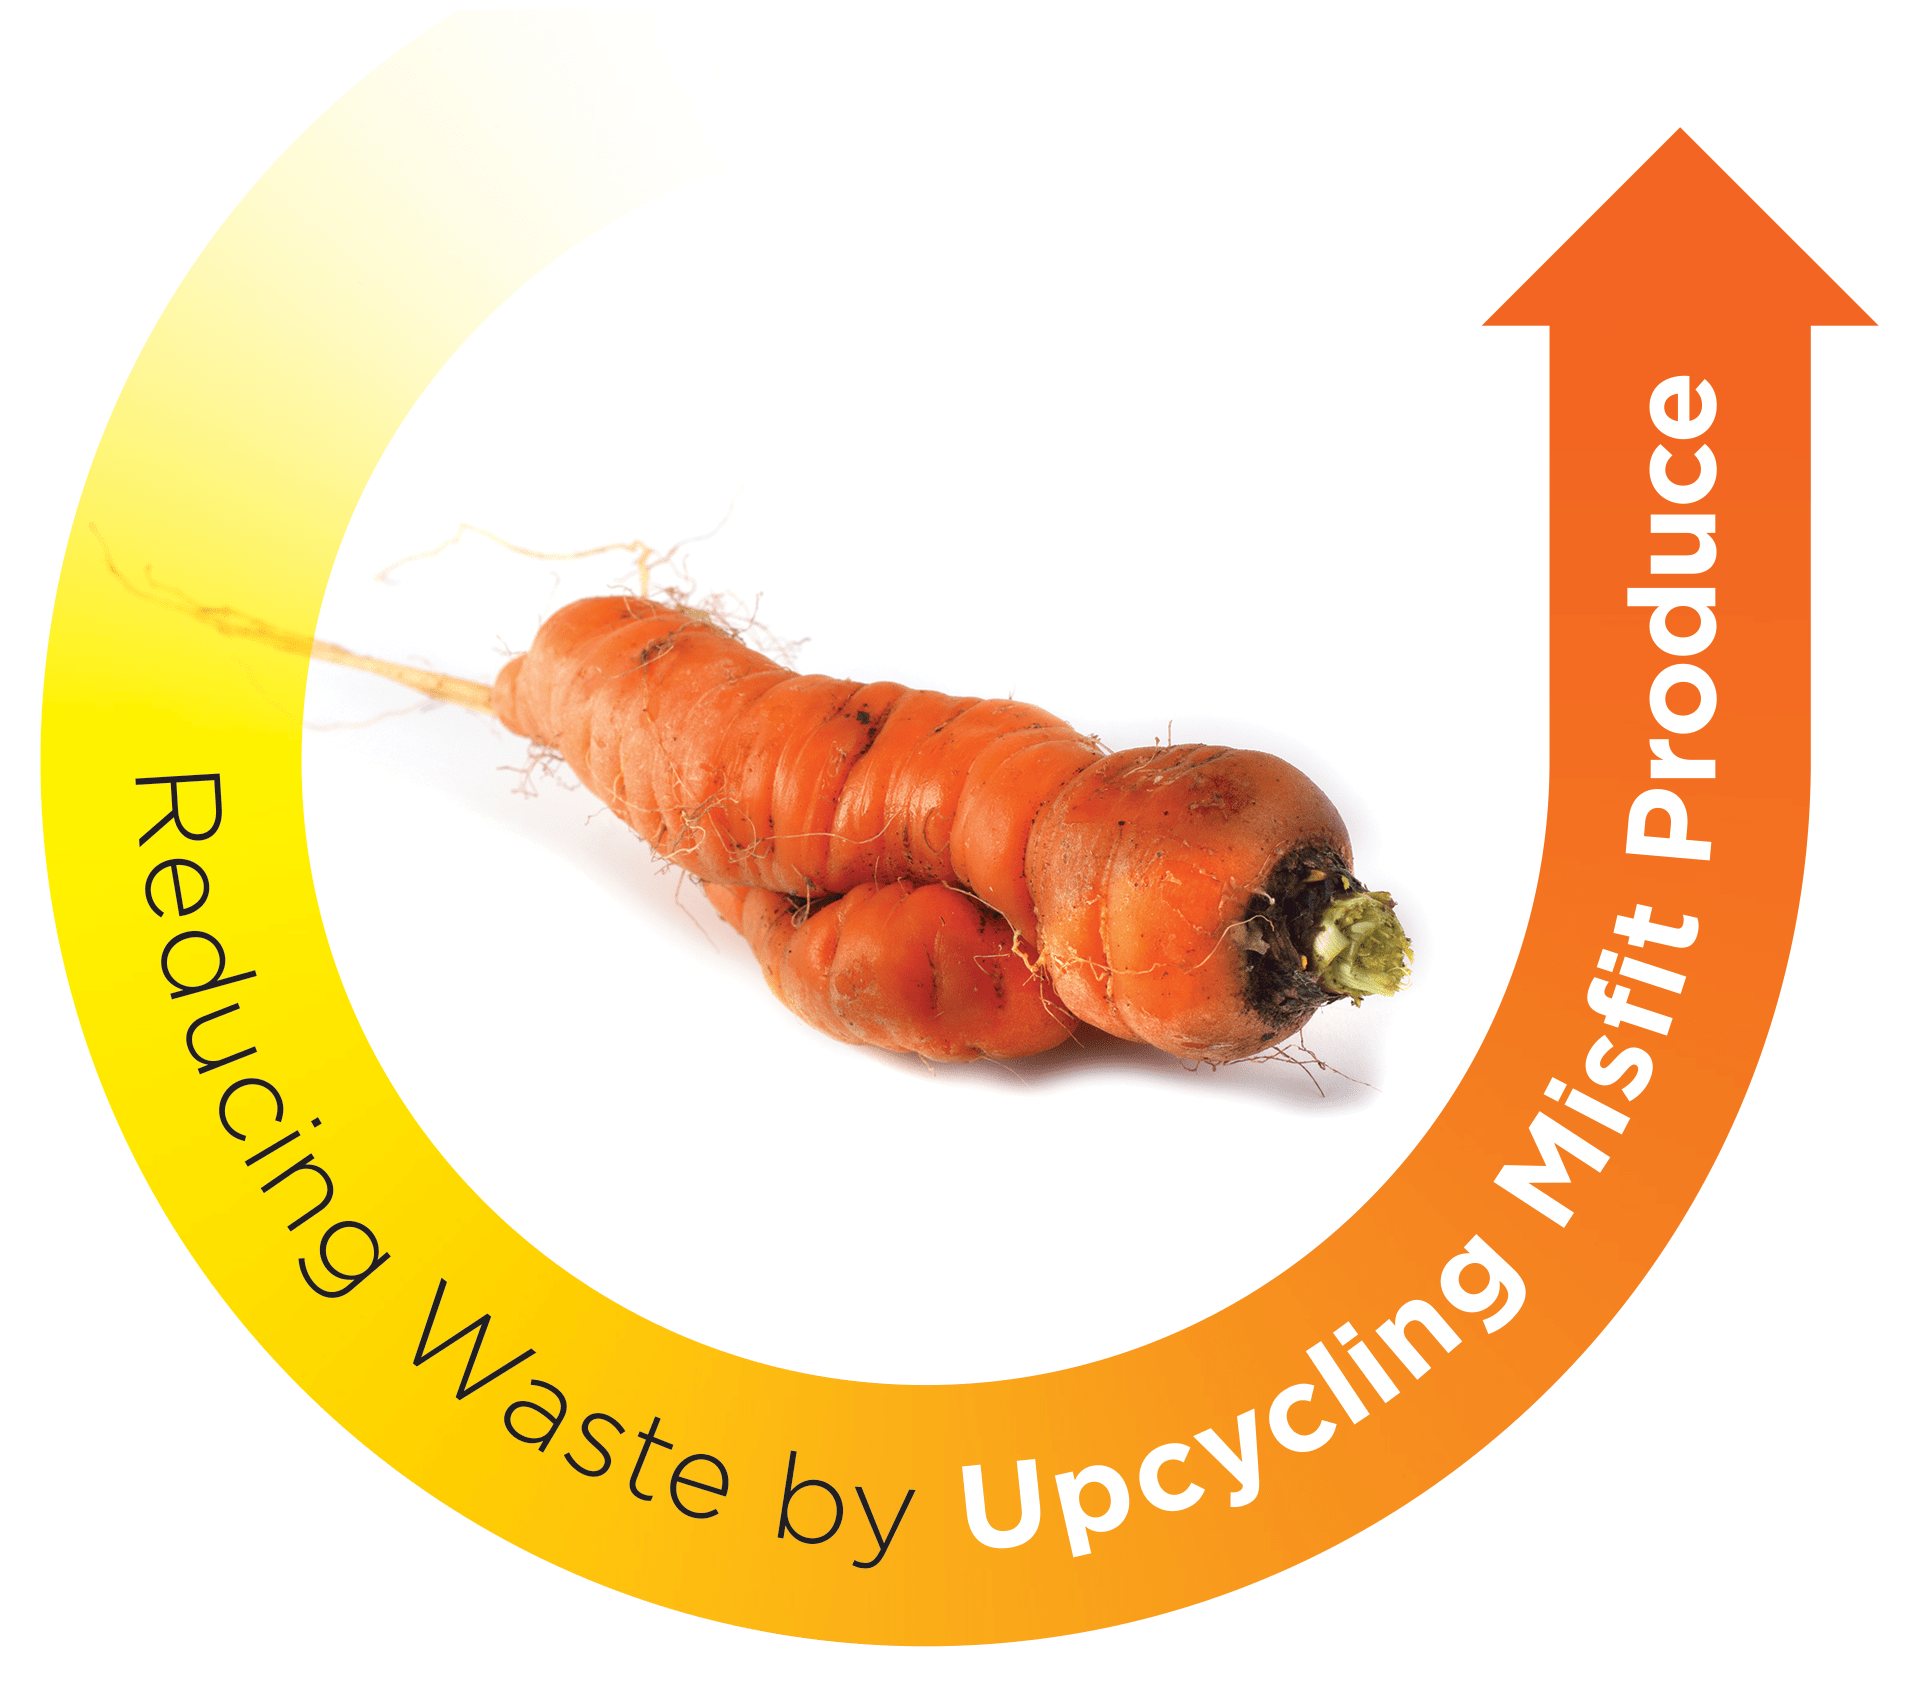 Reducing Waste by Upcycling Misfit Produce